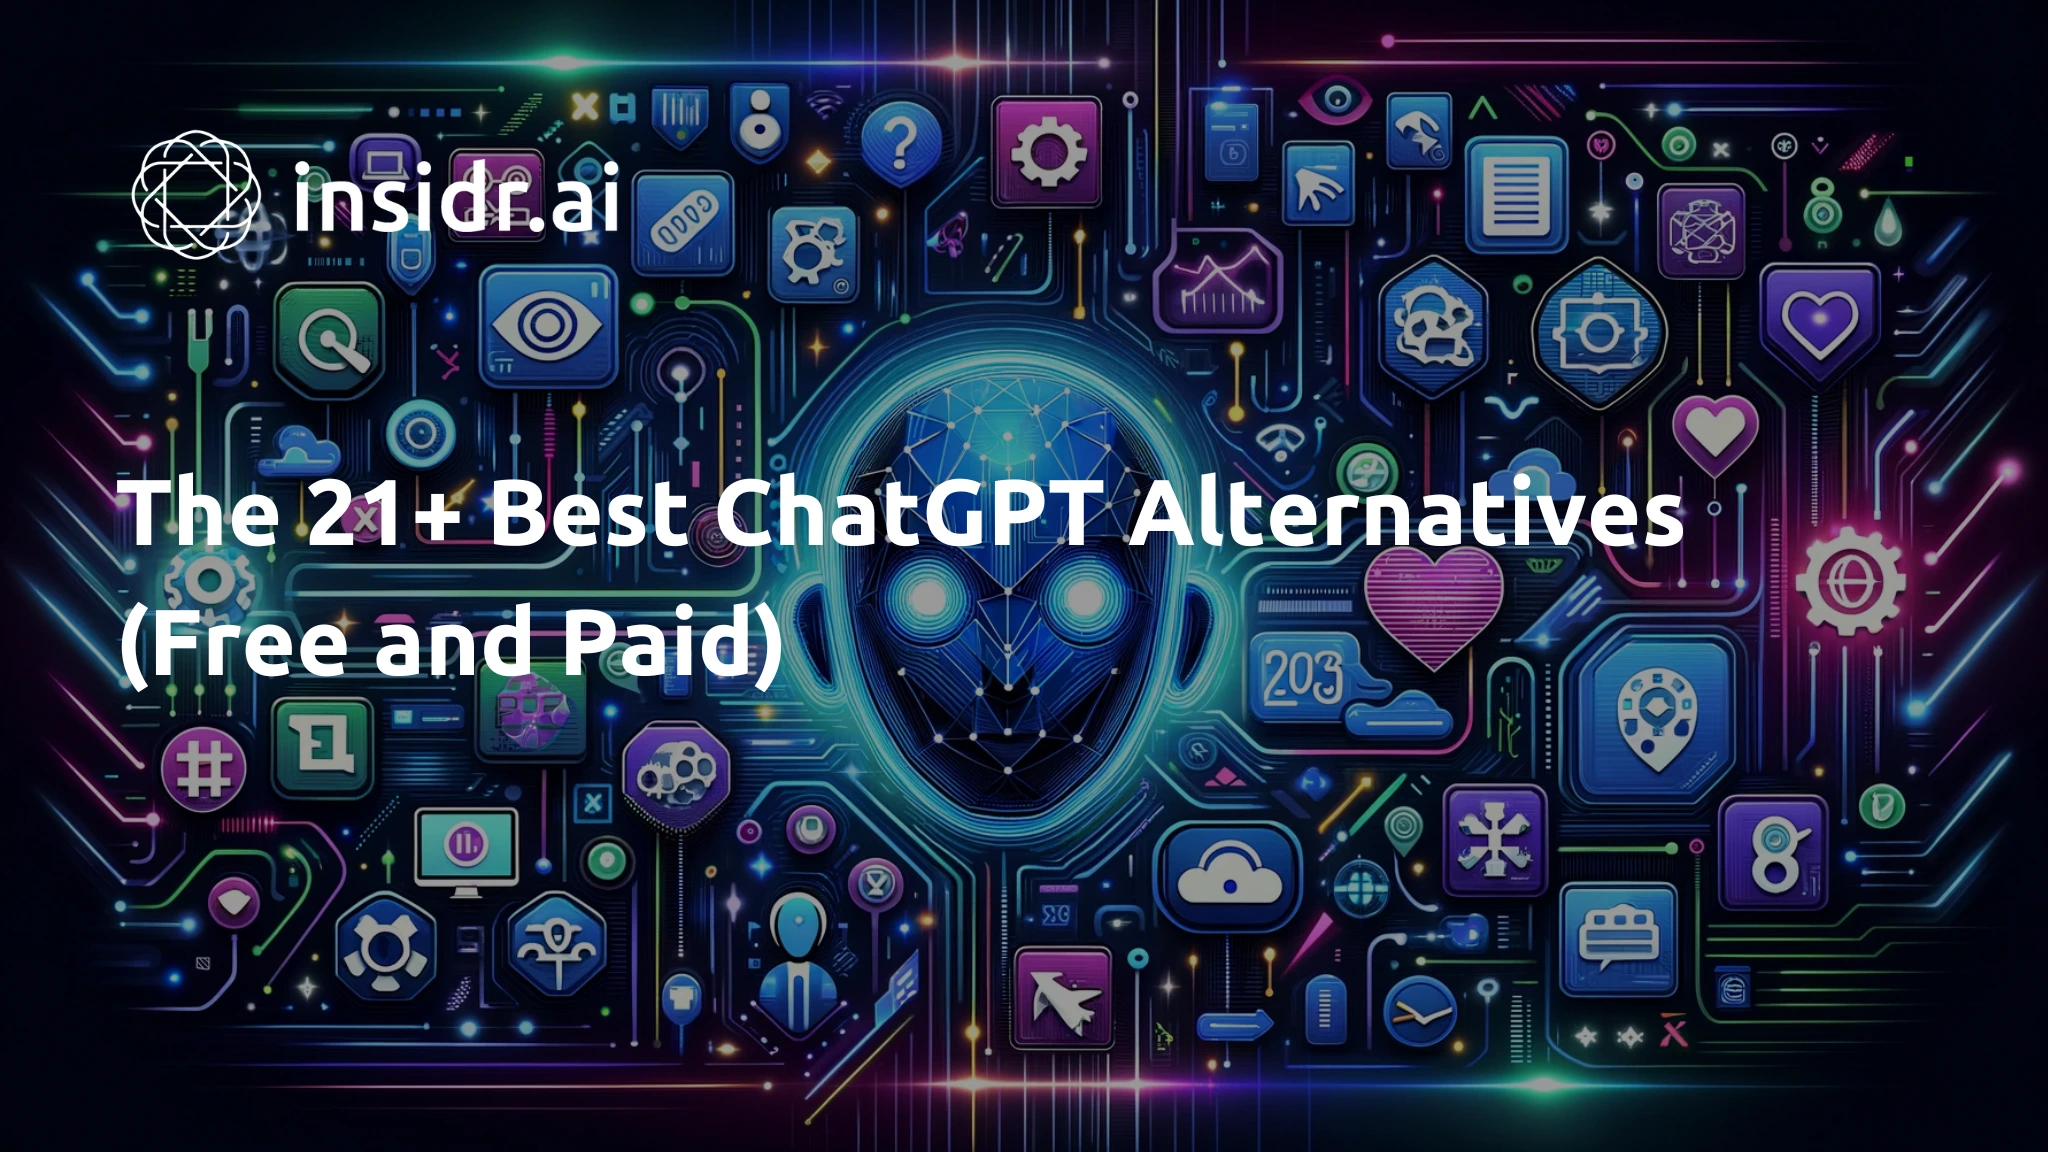 The 21 Best ChatGPT Alternatives (Free and Paid) - insidr.ai